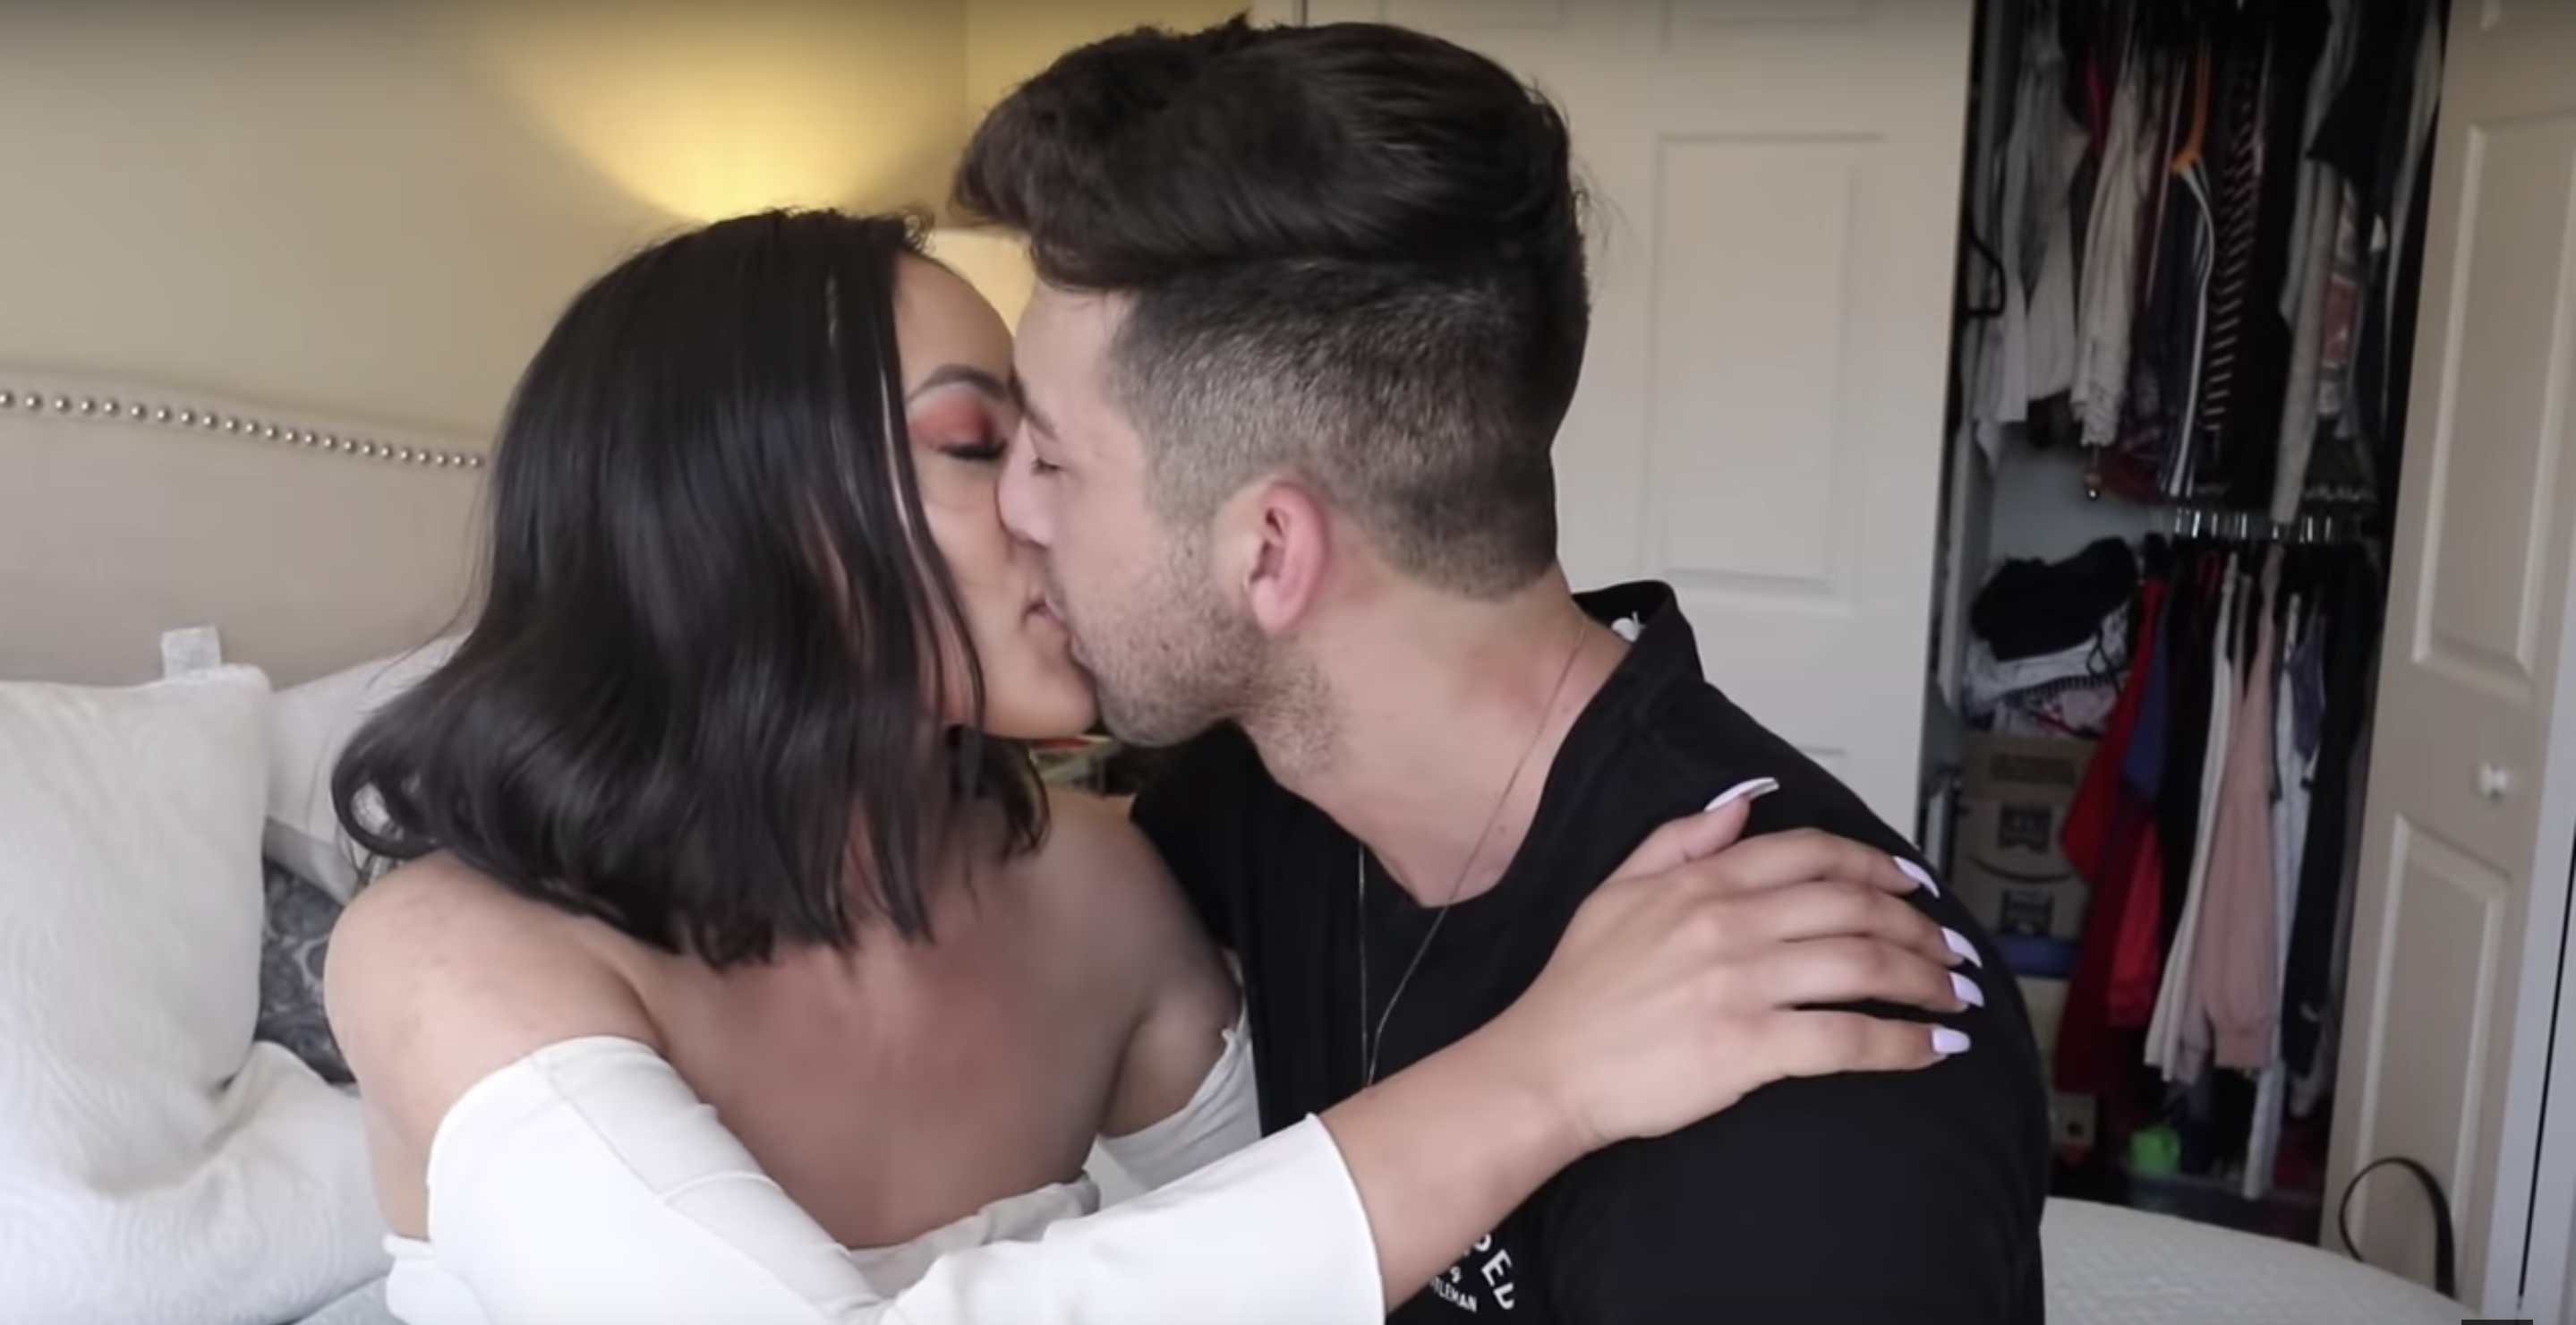 YouTuber horrifies fans after kissing his sister in latest prank video pic